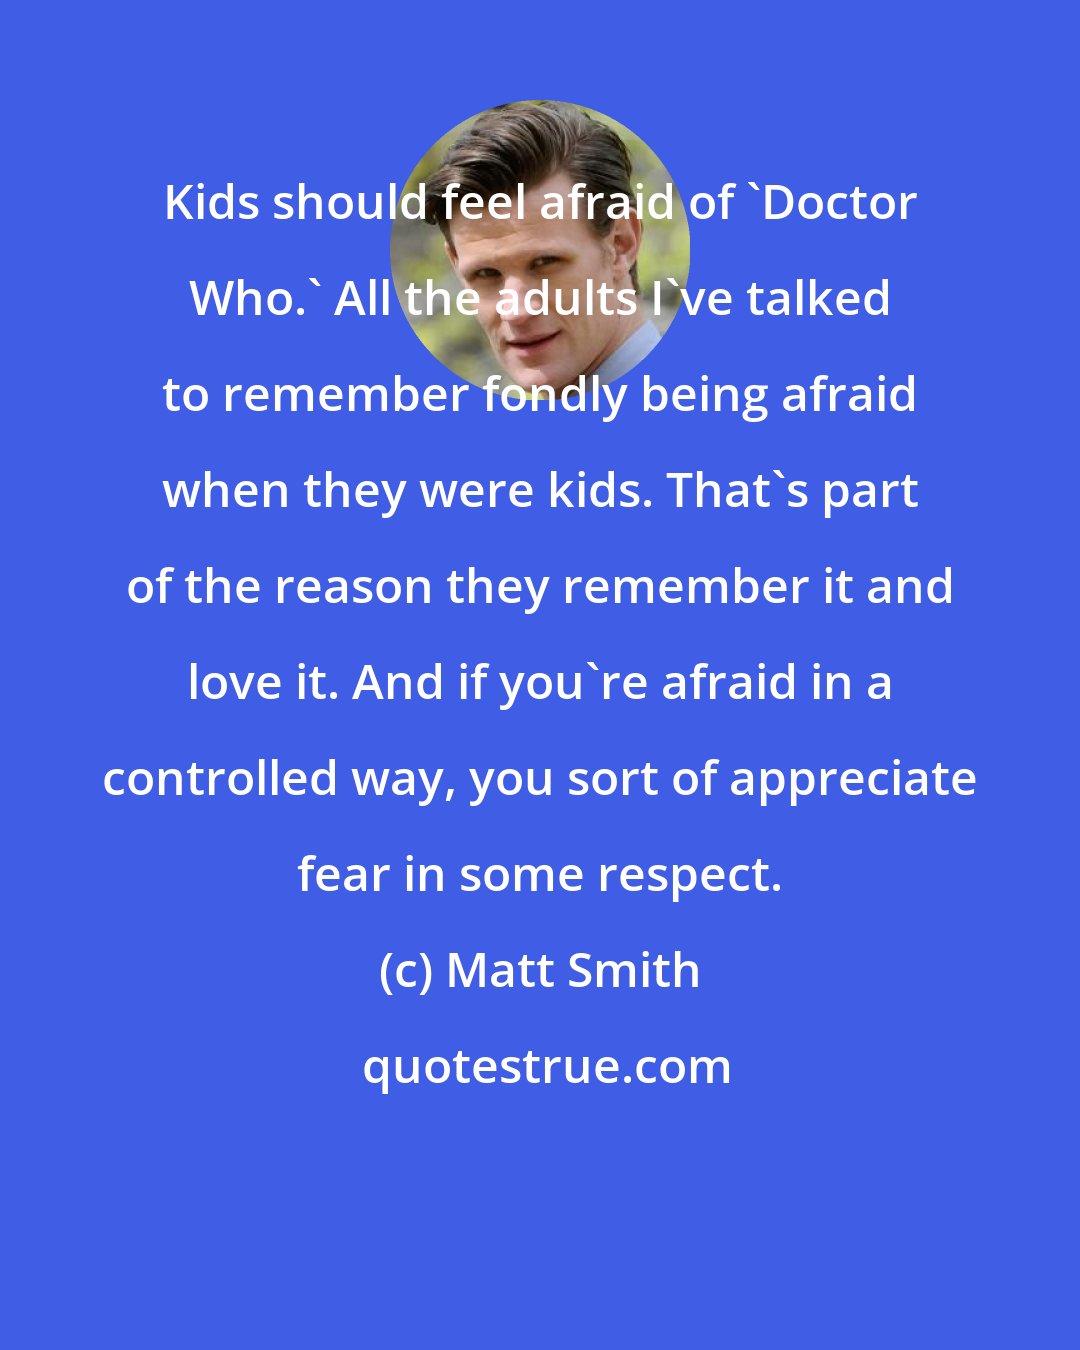 Matt Smith: Kids should feel afraid of 'Doctor Who.' All the adults I've talked to remember fondly being afraid when they were kids. That's part of the reason they remember it and love it. And if you're afraid in a controlled way, you sort of appreciate fear in some respect.